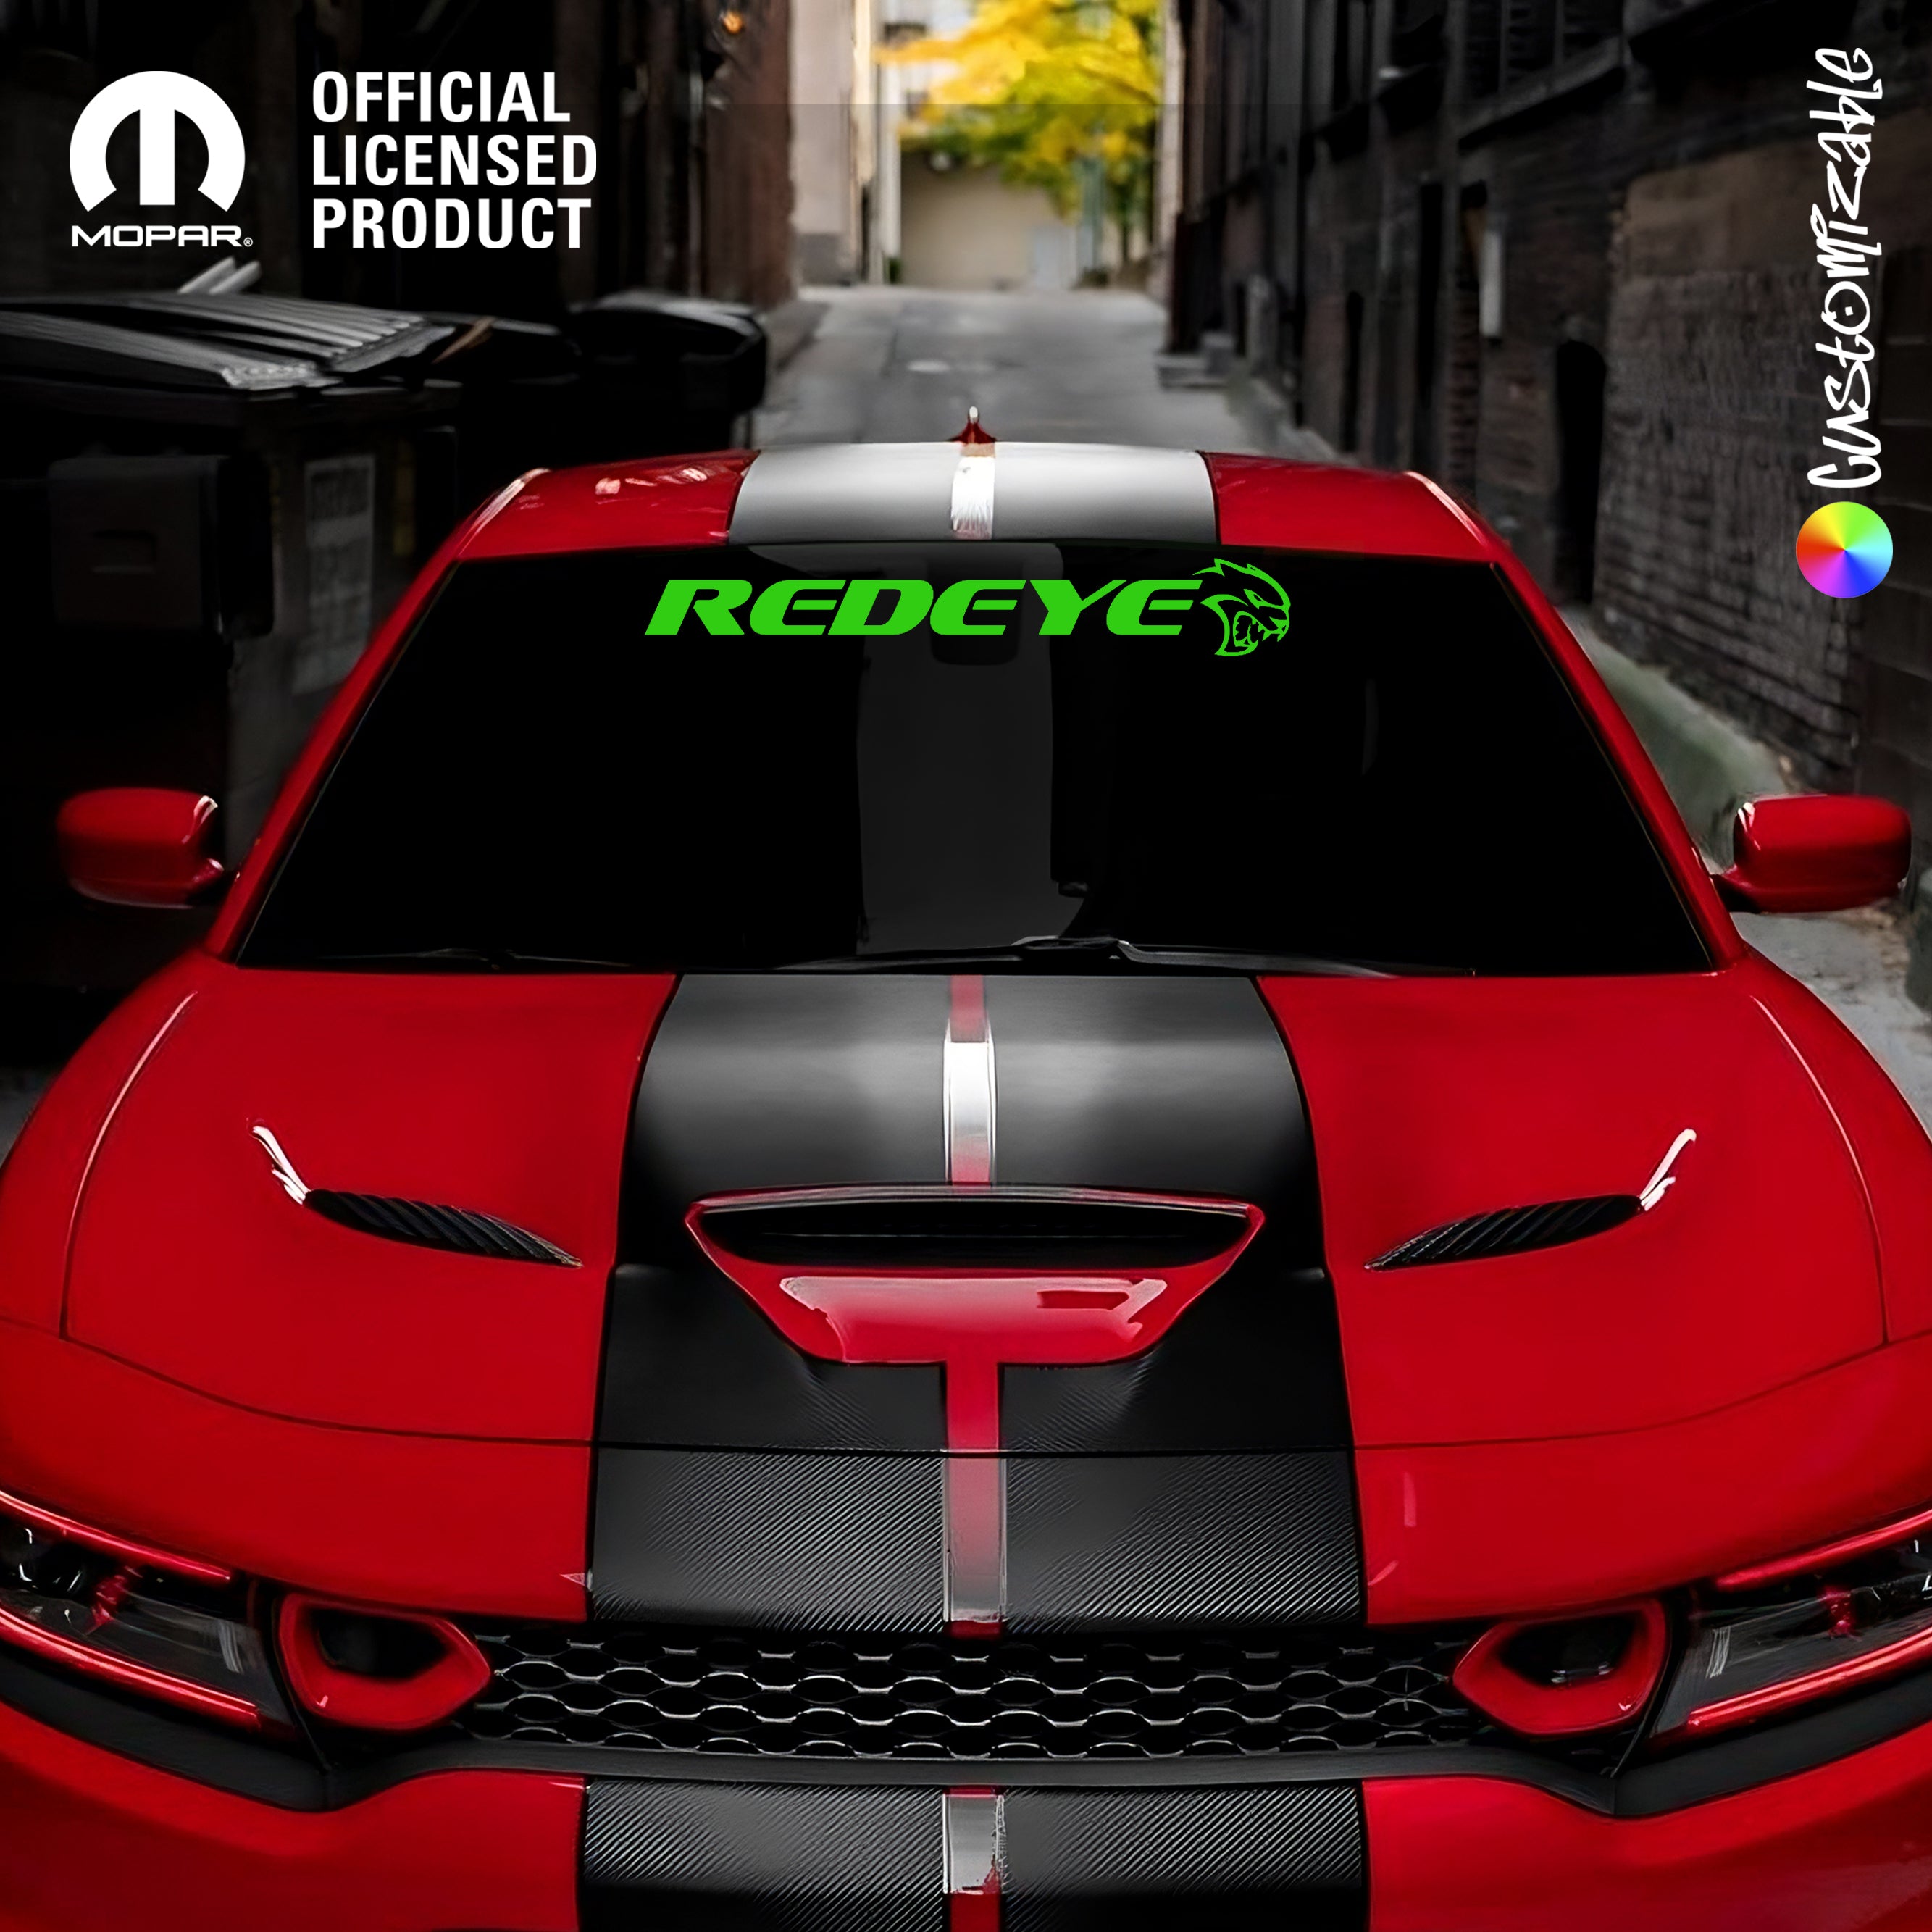 Hellcat Redeye Windshield Banner for Charger & Challenger - Multiple Sizes